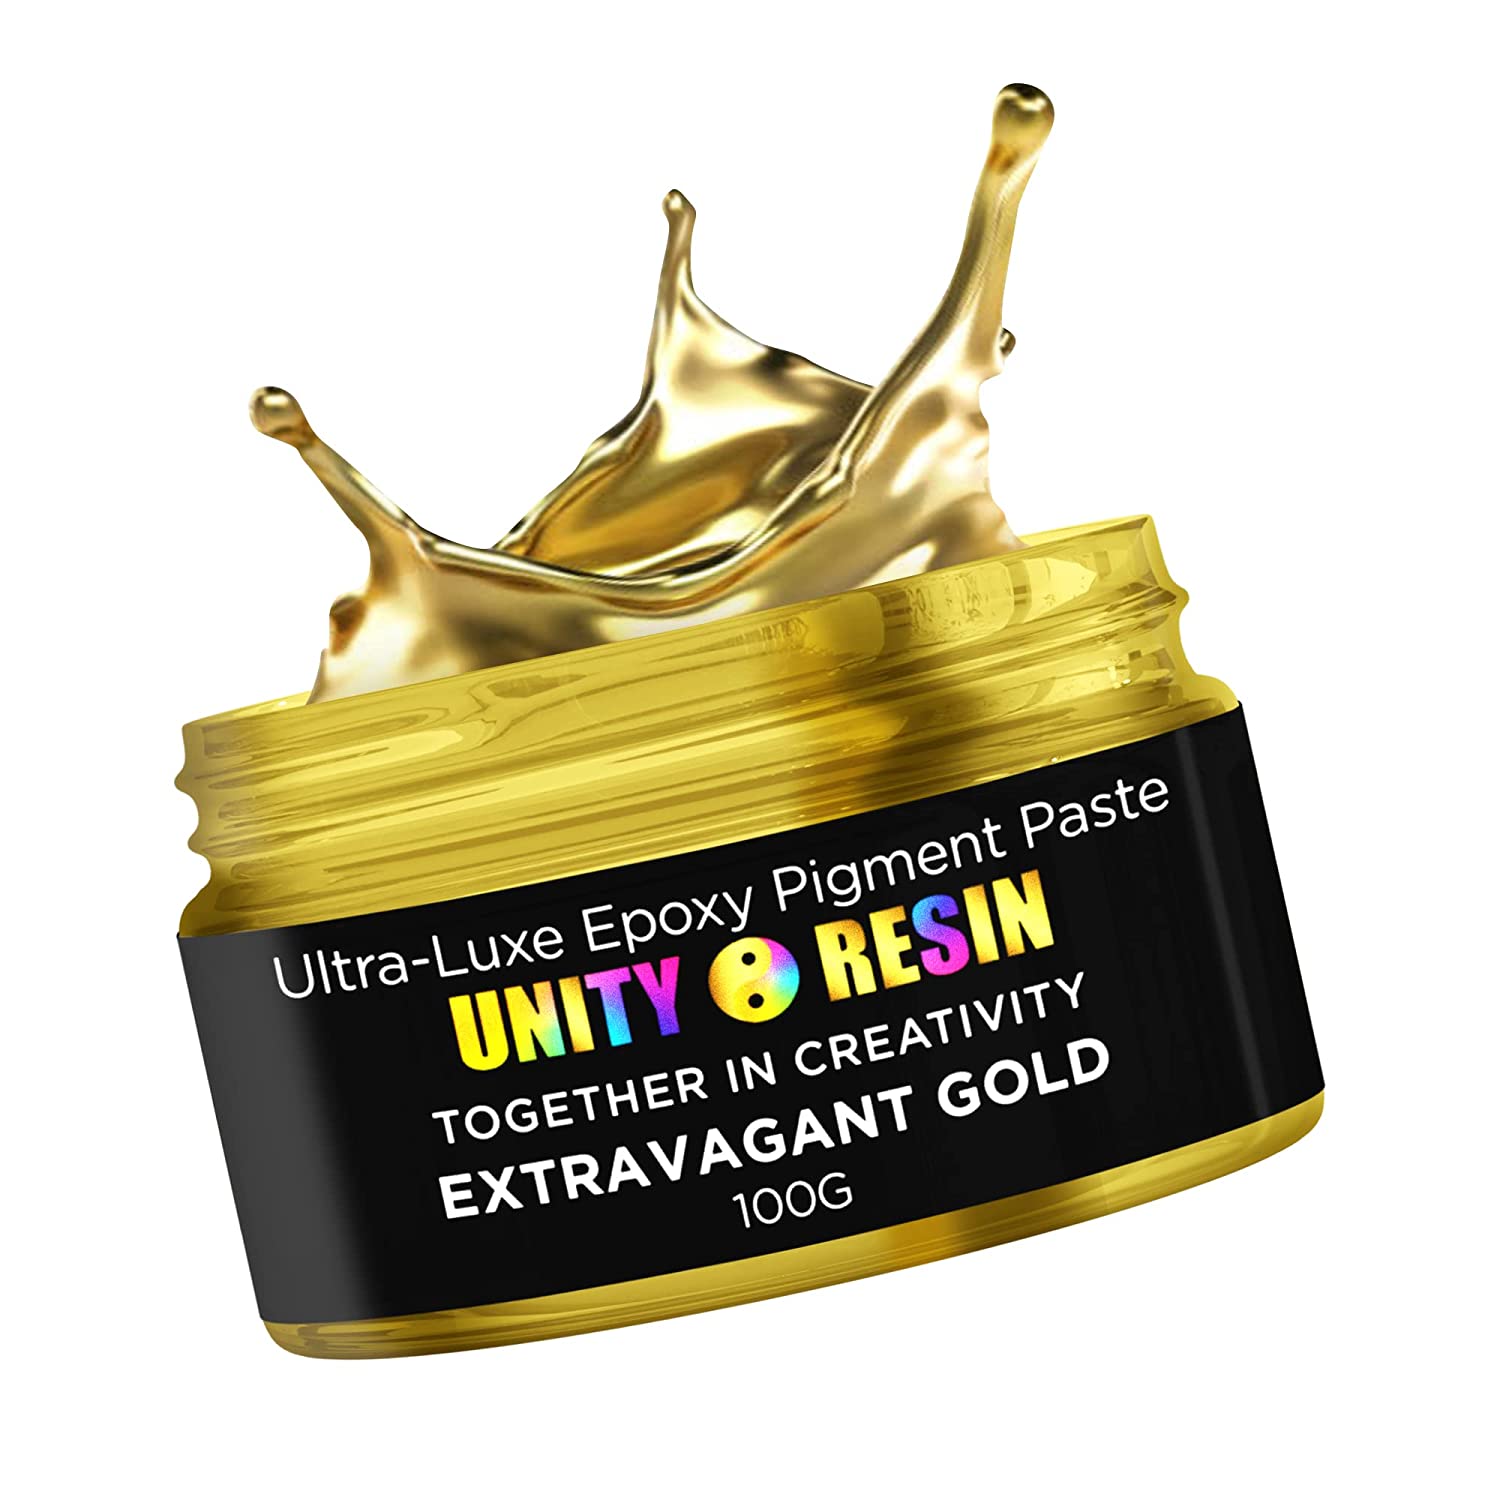 Ultra Luxe' Epoxy Pigment Paste-extravagant GOLD, Resin Art, Gold Mica,  Floating Pigment, Resin Lacing, Resin Pigments, Resin Cell Pigments 